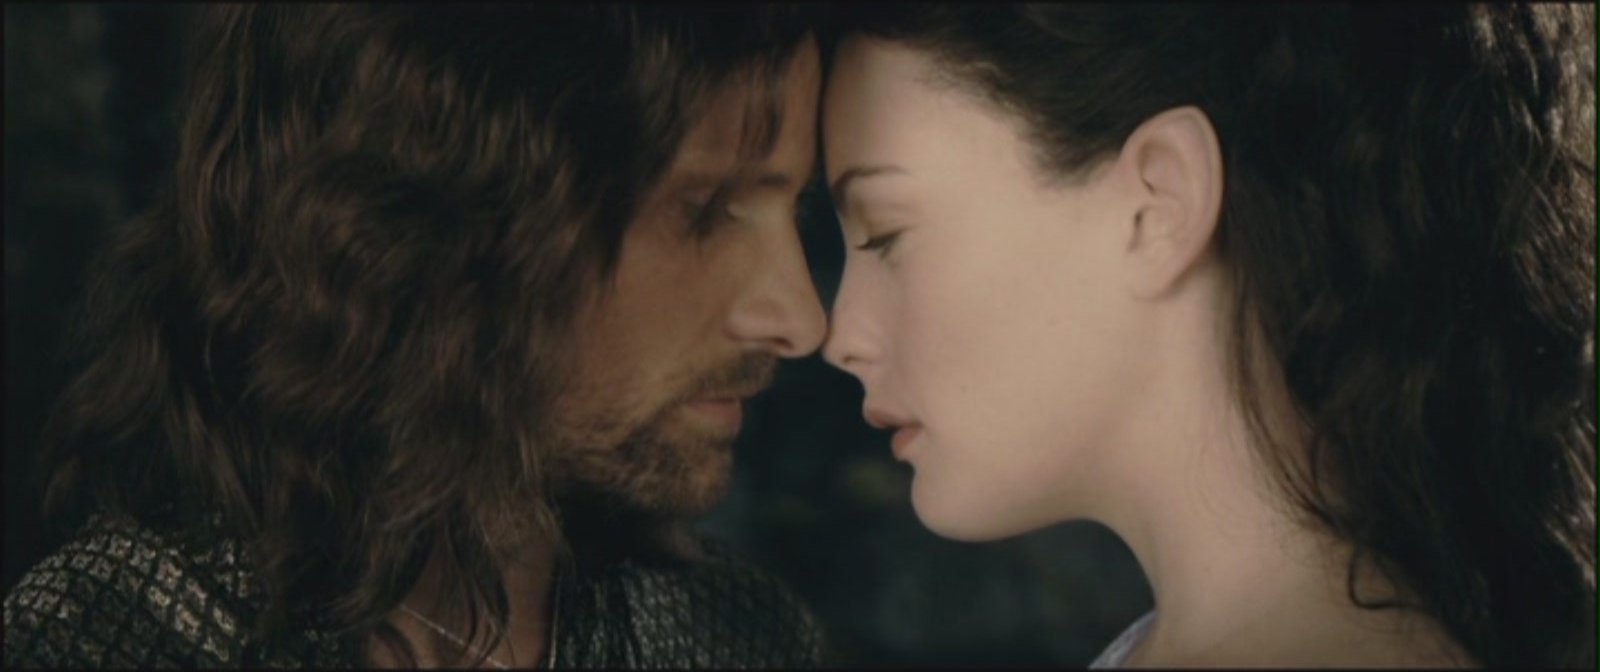 Arwen-and-Aragorn-Lord-of-the-Rings-The-Two-Towers-aragorn-and-arwen-11666113-1600-672.jpg